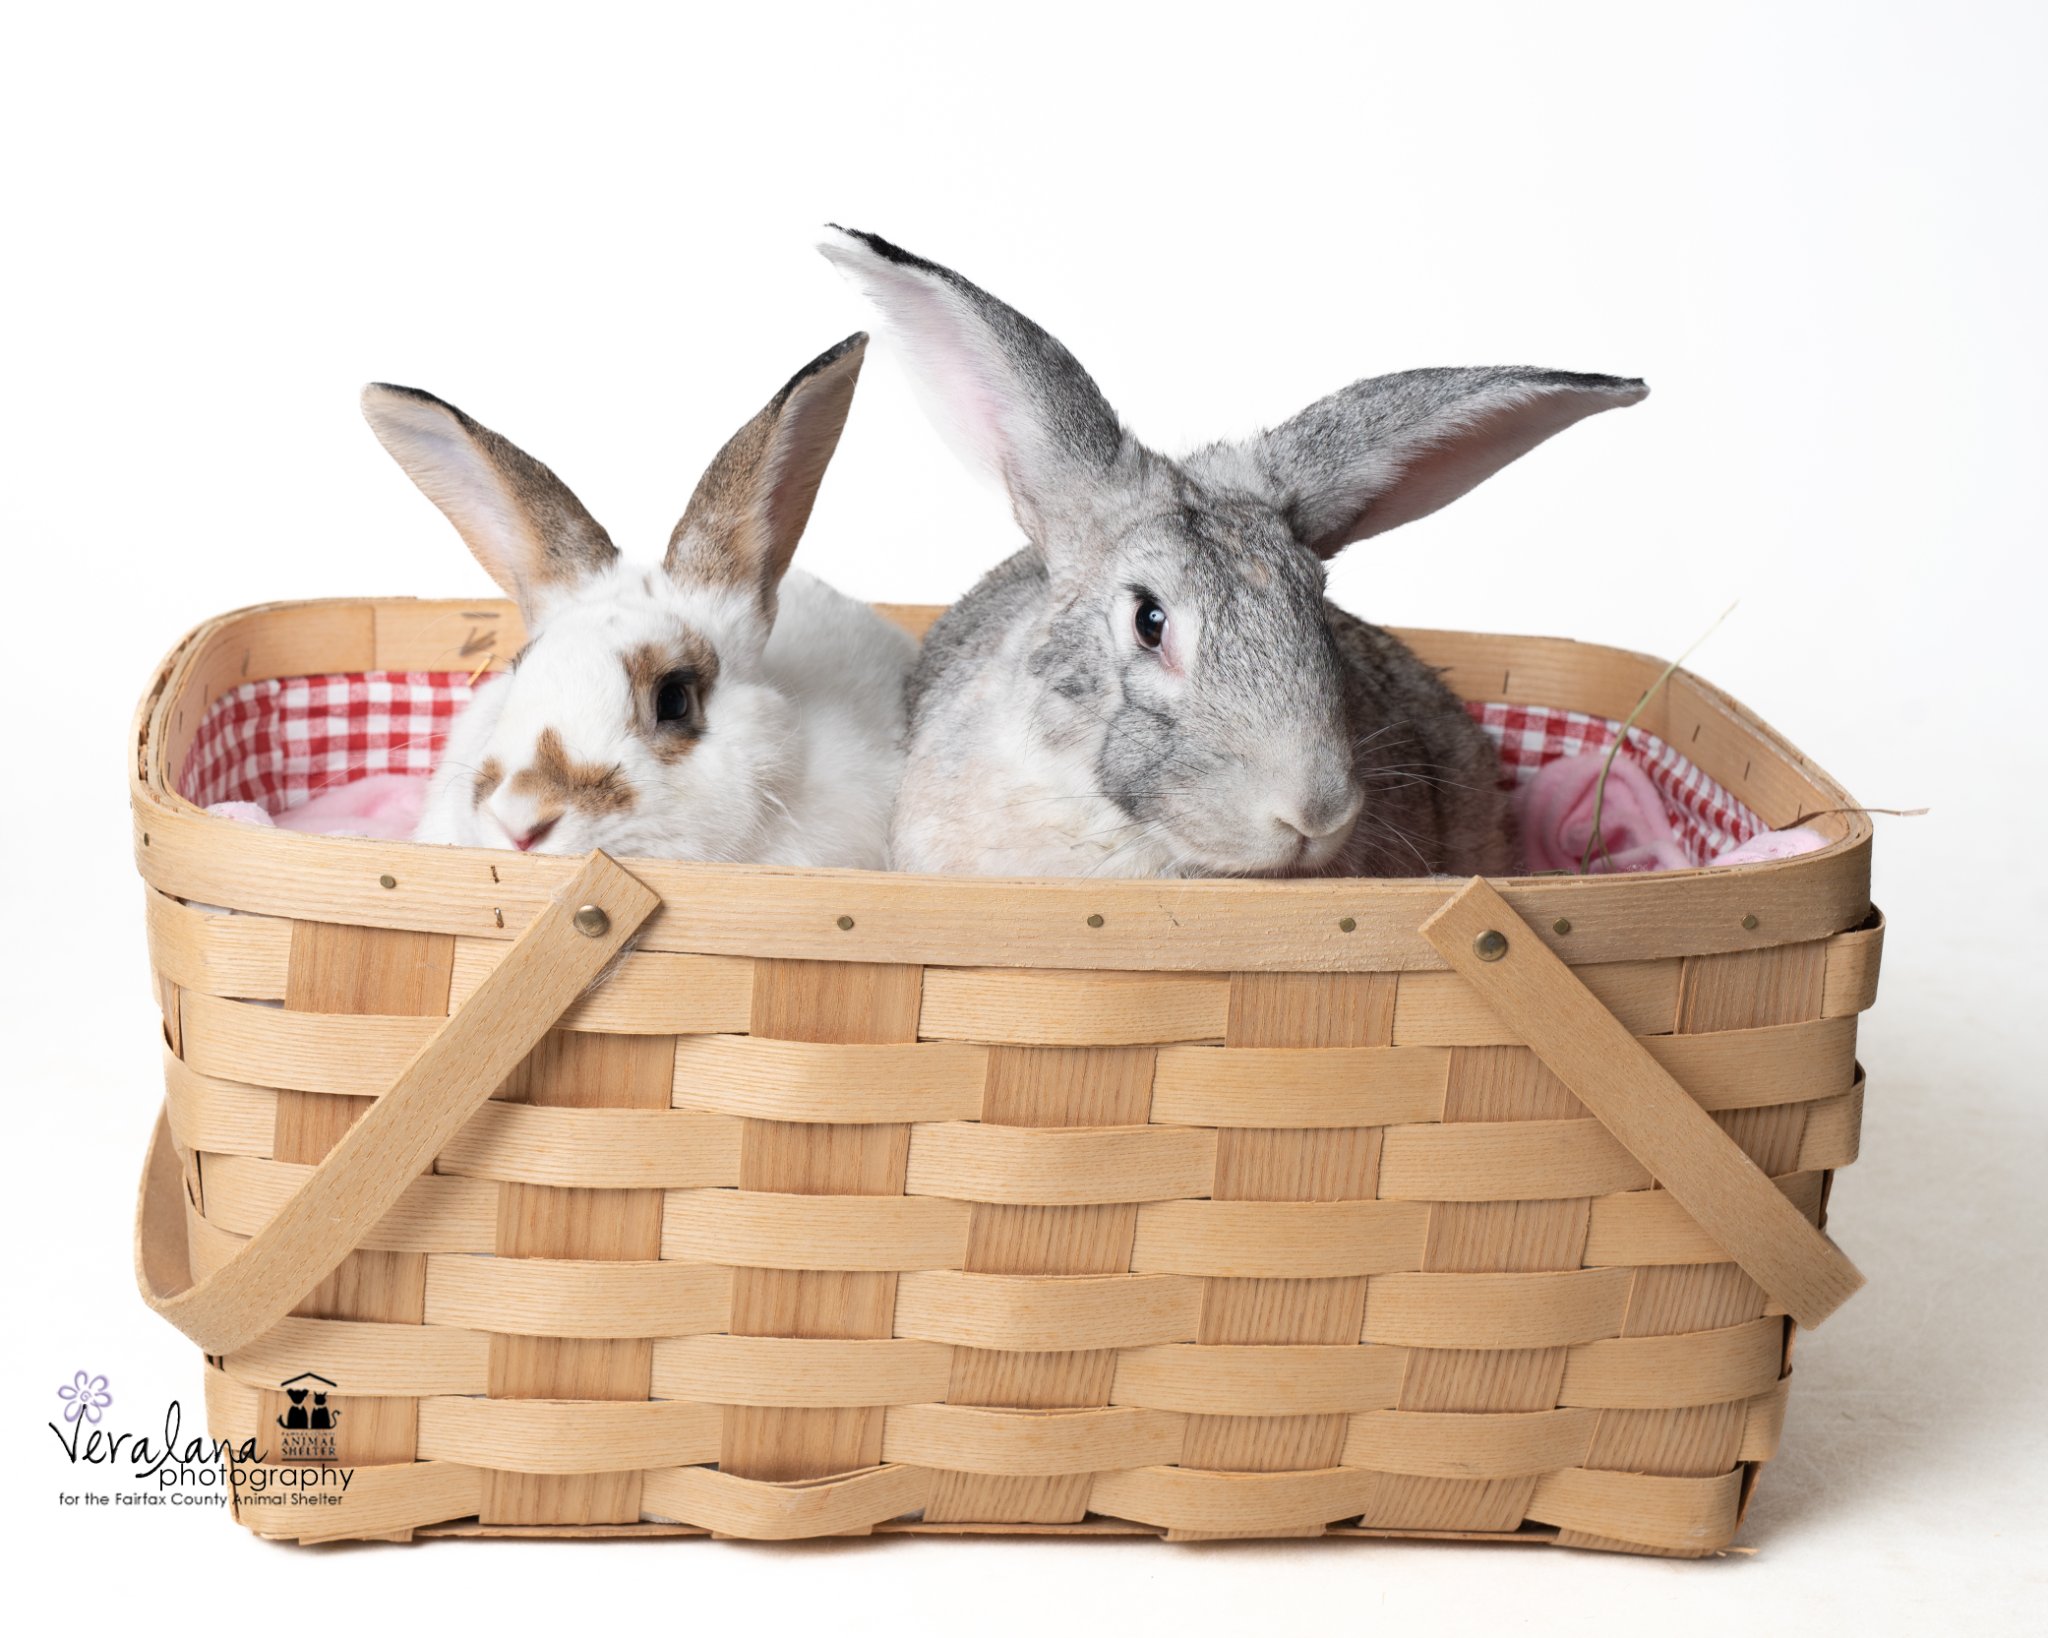 Two best friend rabbits share a basket. They look happy. 